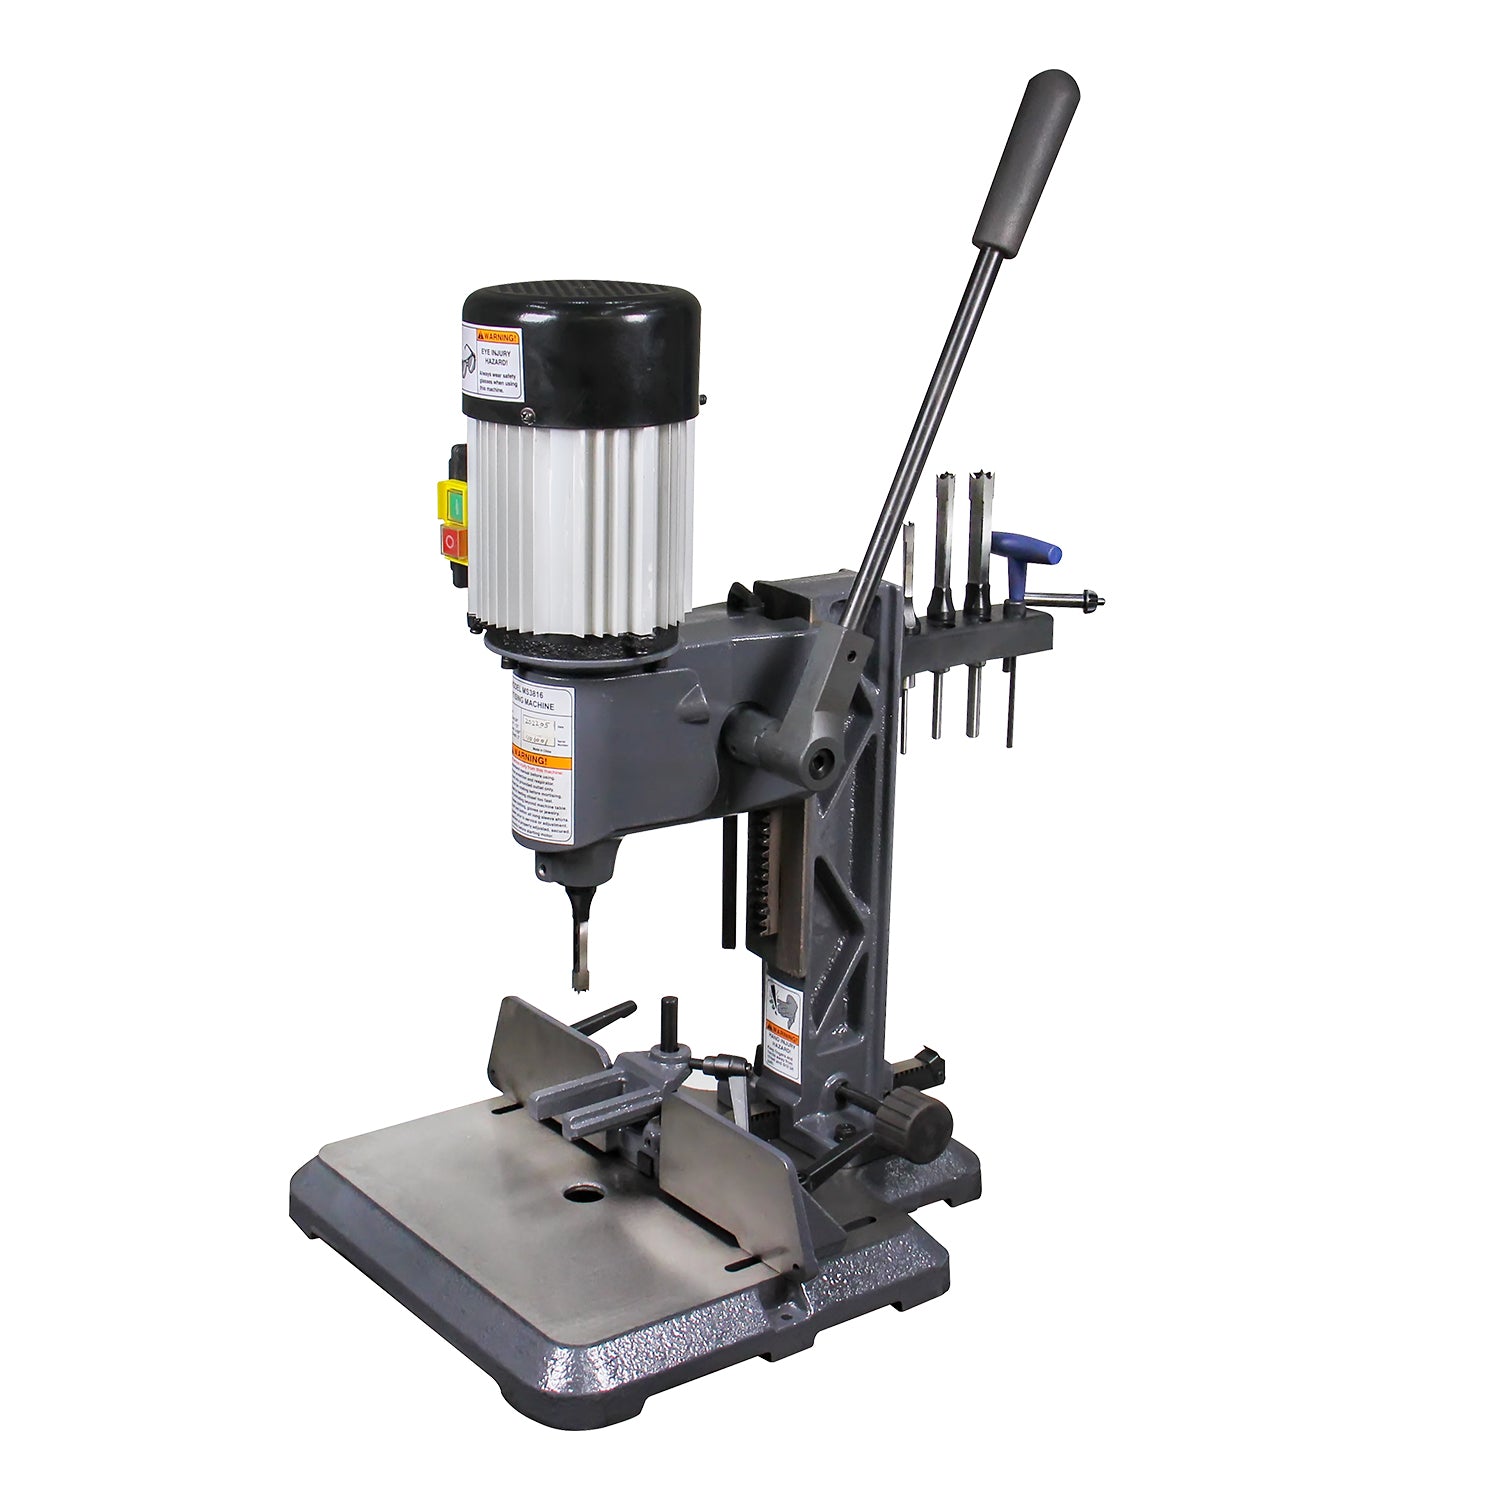 Kaka industrial MS-3816 Woodworking Mortise Machine, 1/2 HP 1725RPM  Powermatic Mortiser With Chisel Bit Sets, Benchtop Mortising Machine, For  Making 